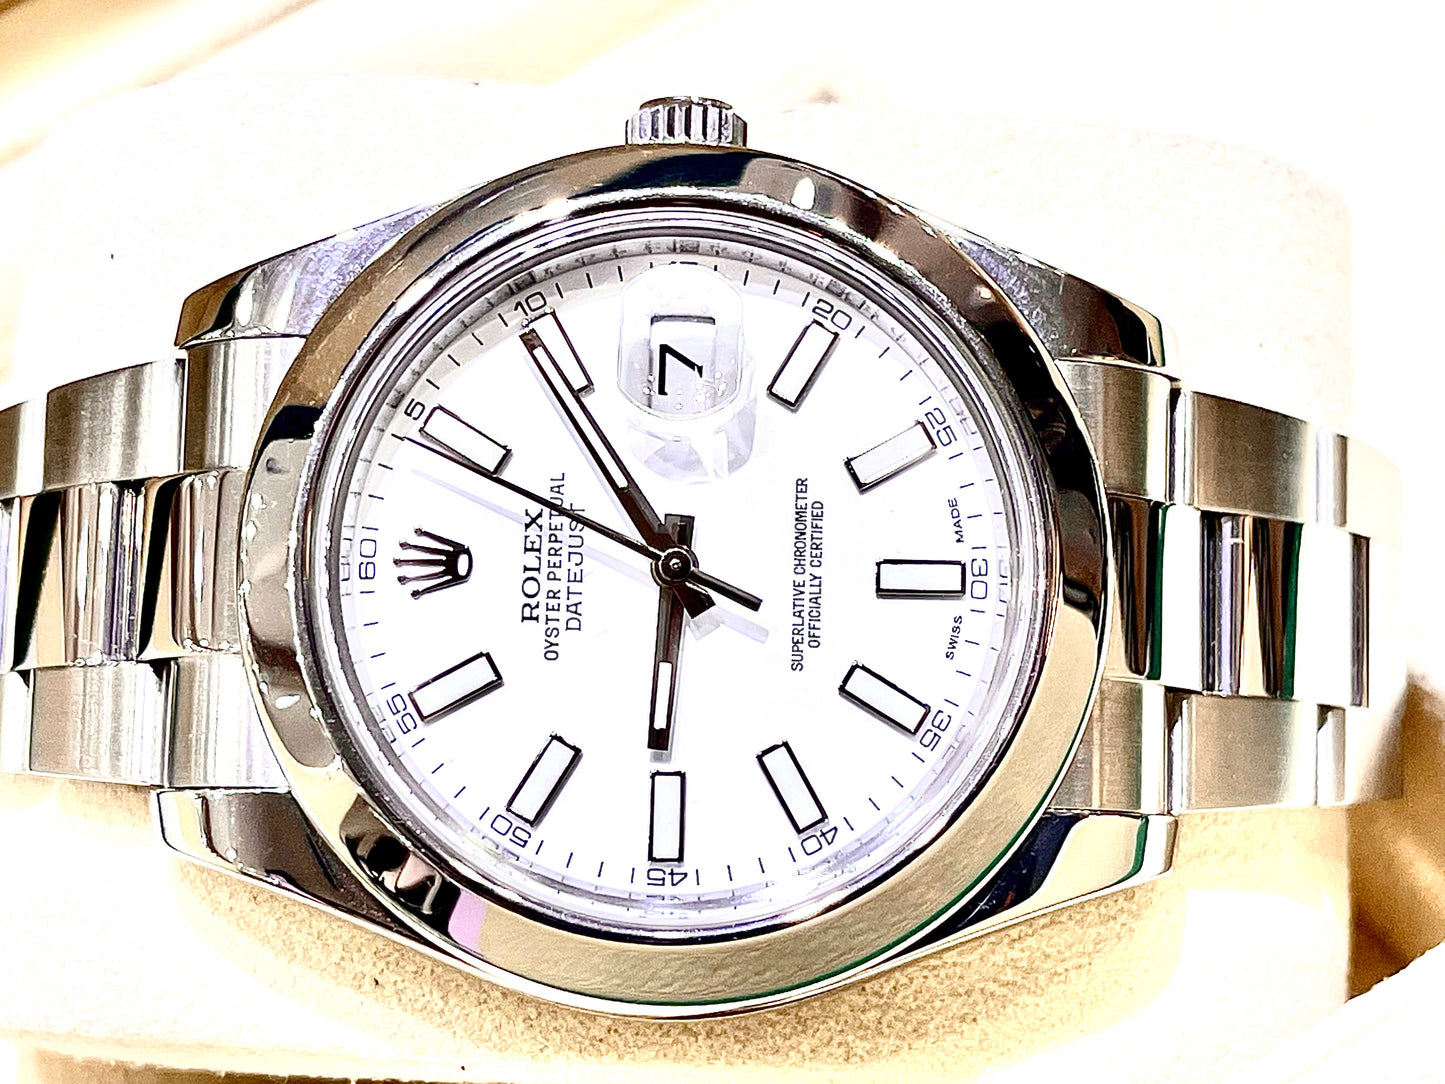 Rolex Datejust 41mm SS White Stick Dial 116300